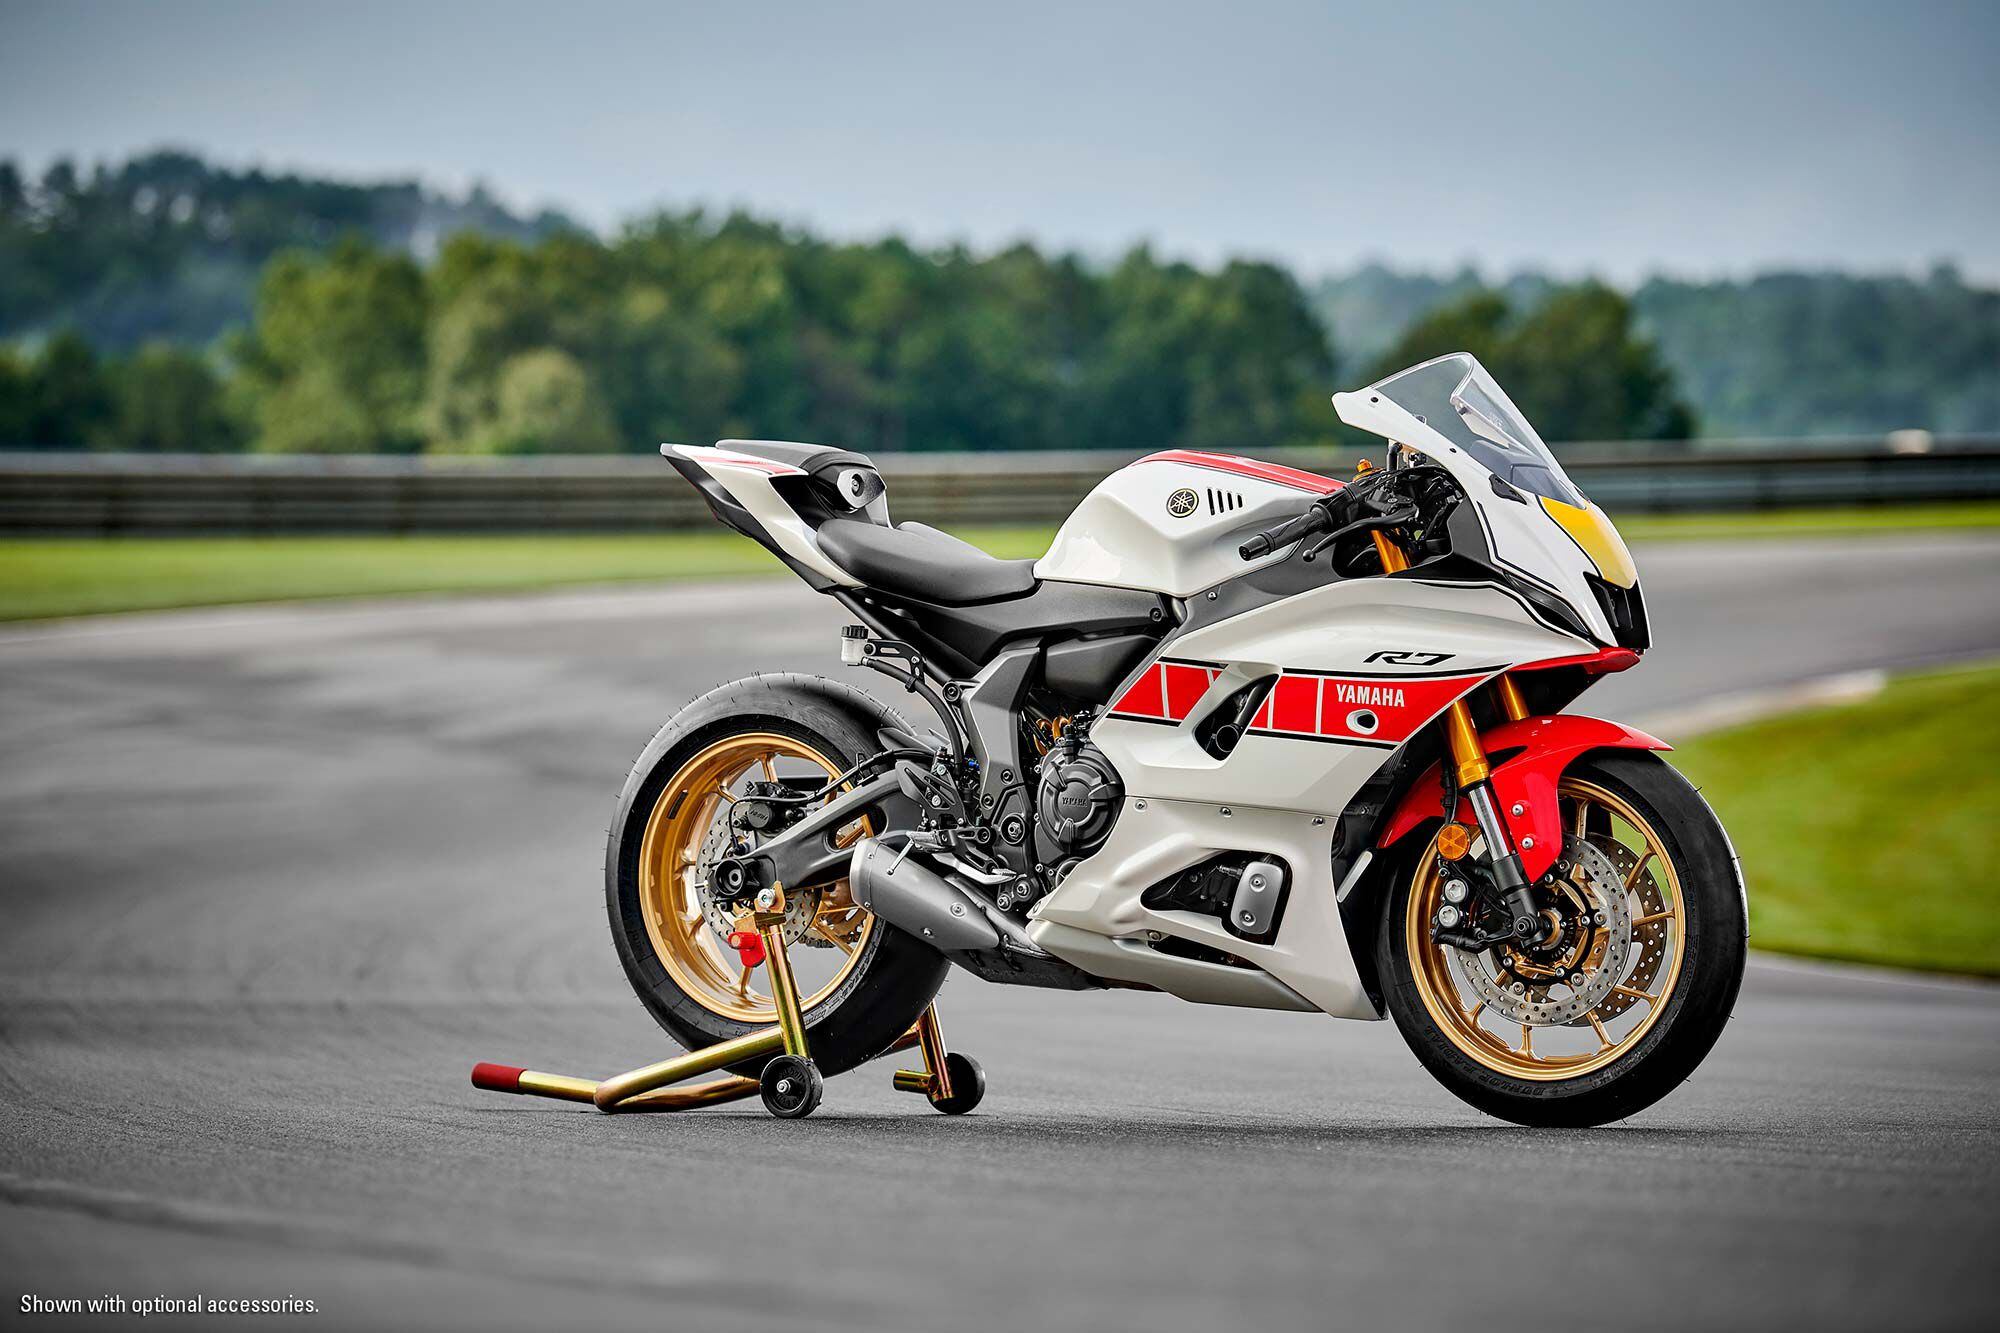 Classic Yamaha white and red block colorway.